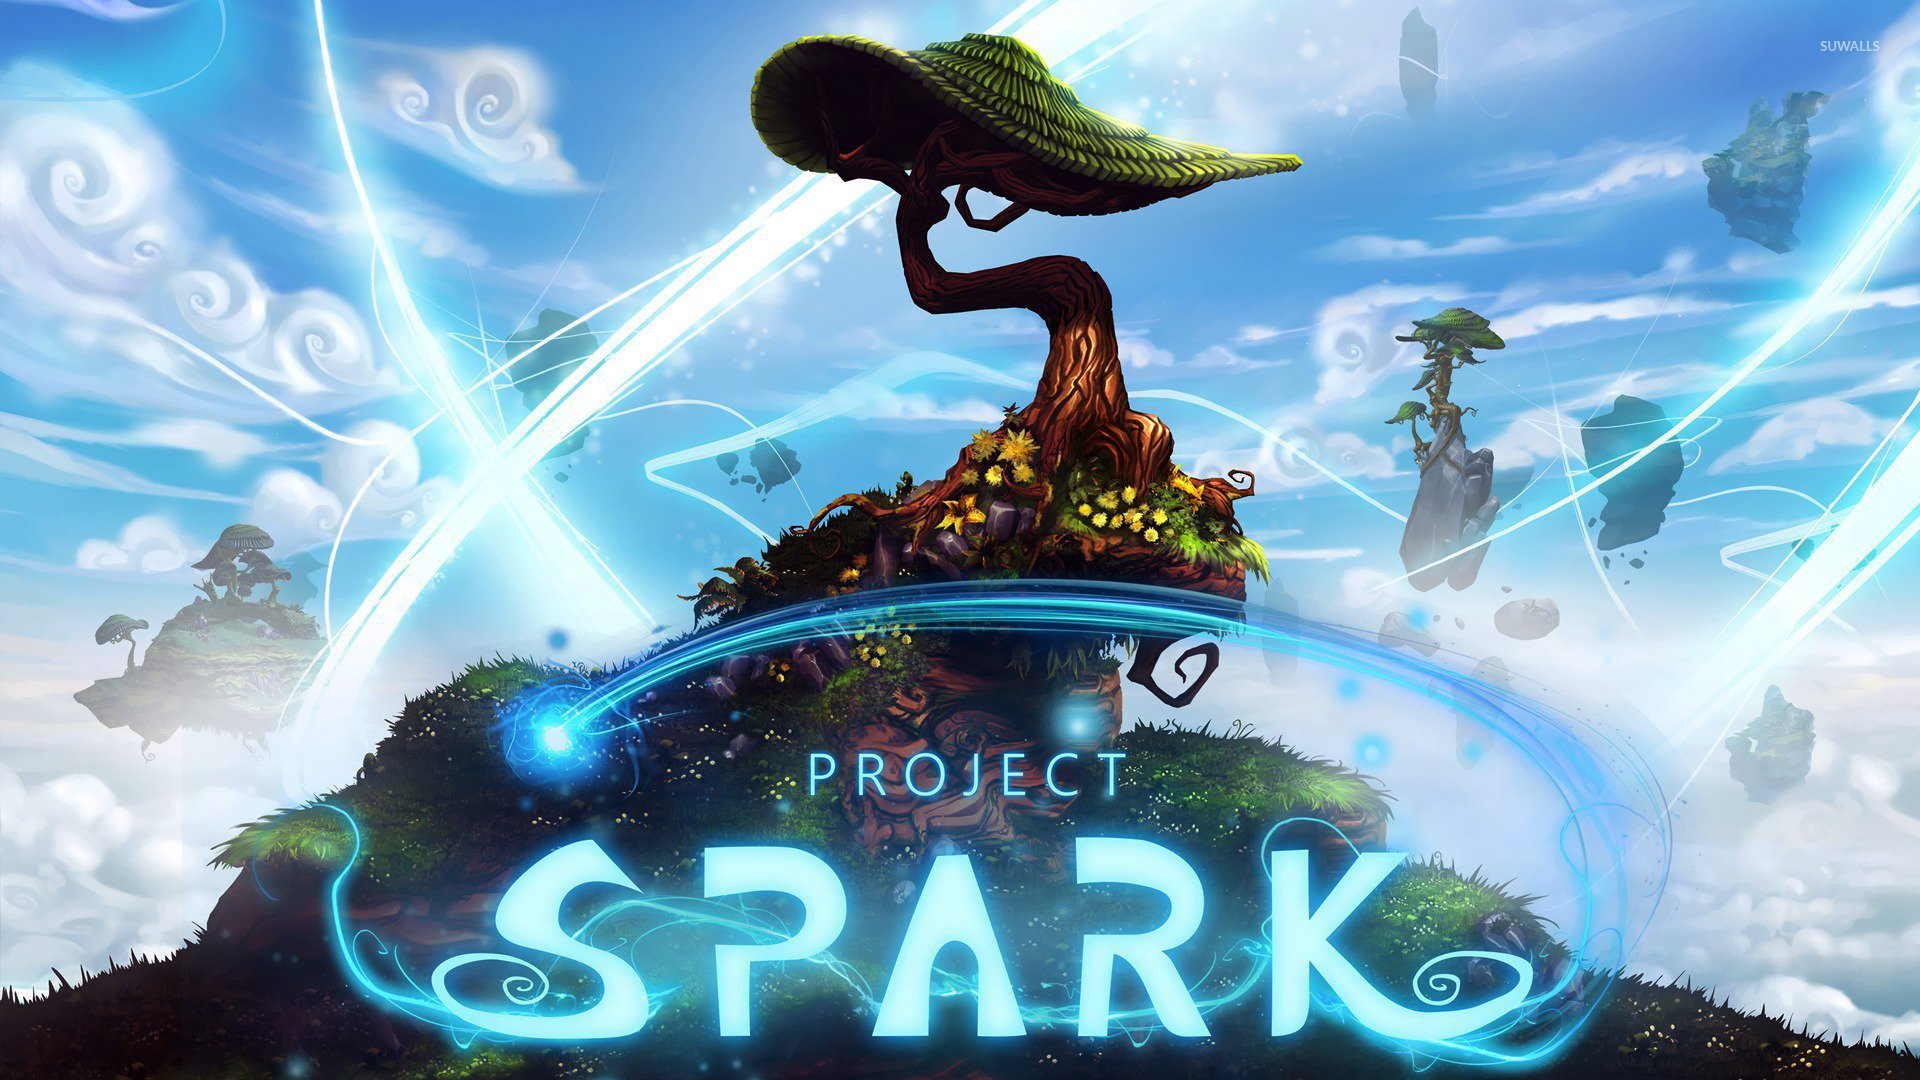 Project Spark wallpaper   Game wallpapers   21690 1280x800